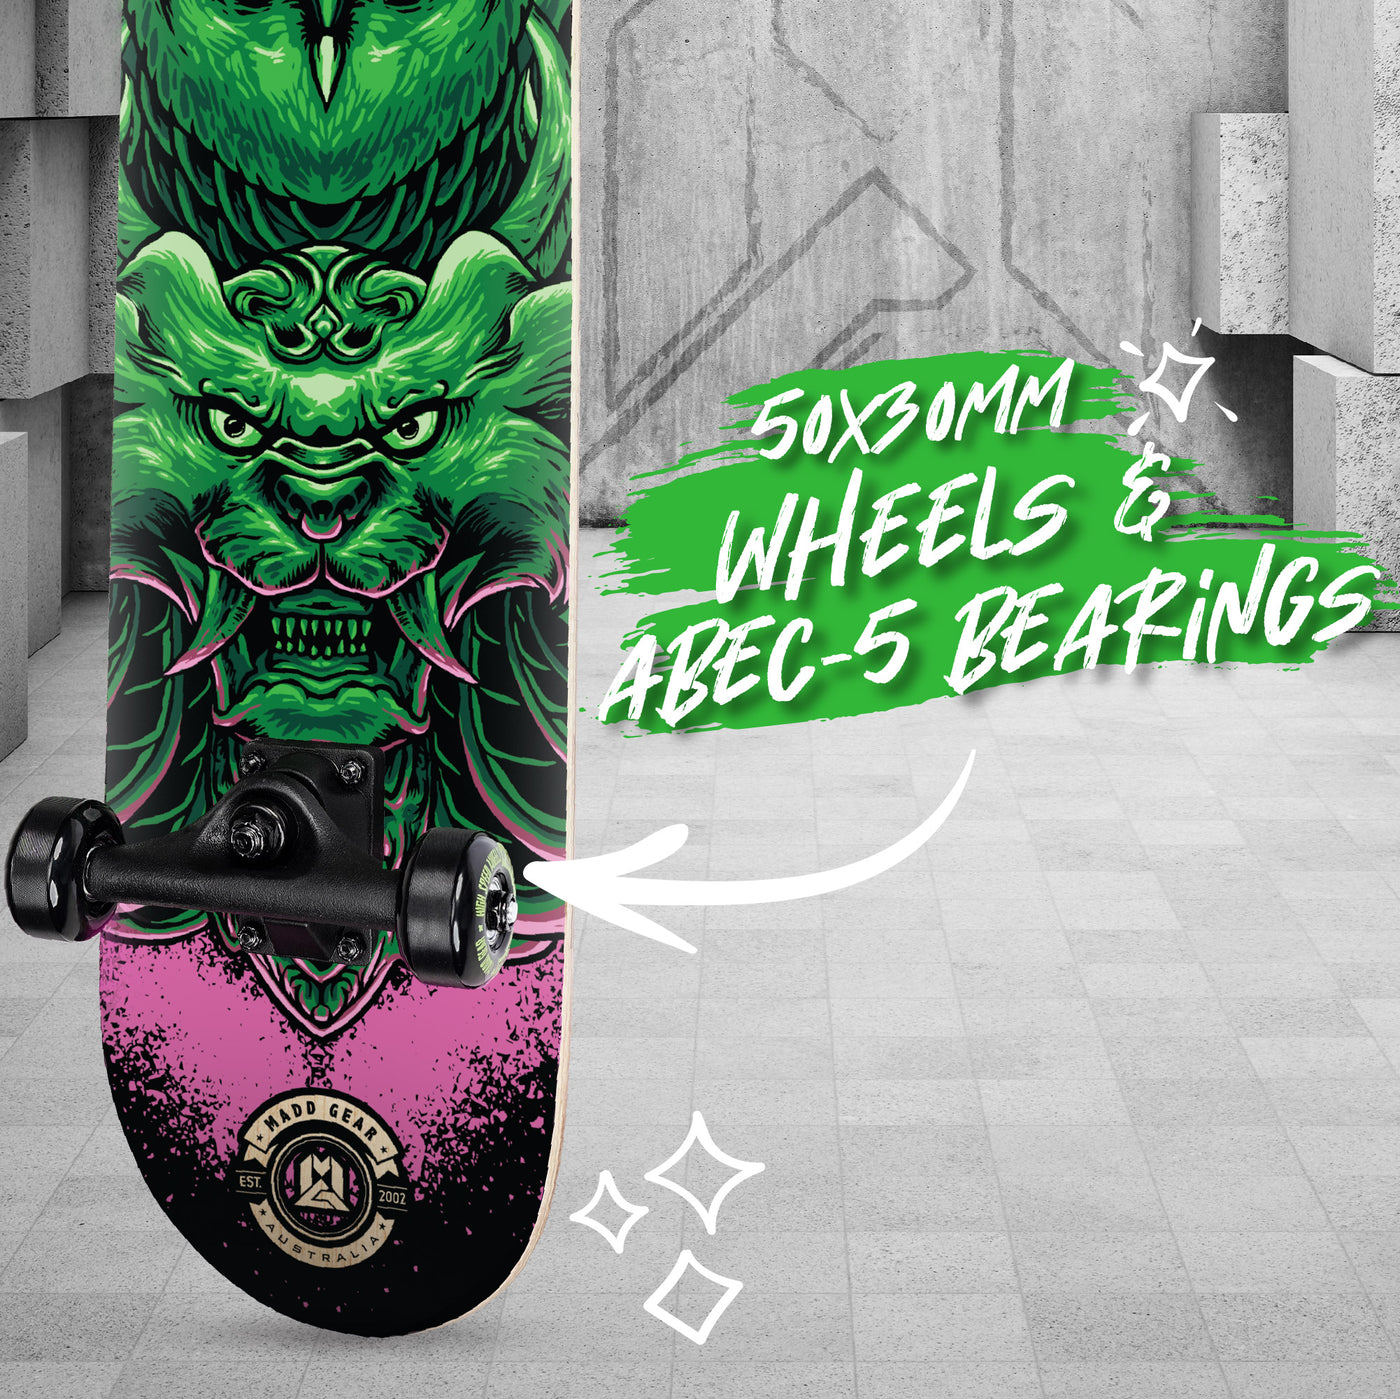 Madd Gear Skateboard Maple Popsicle 31" Pink Green Ply Aluminum Trucks High Quality Pink and Green Lightweight Beginners Smooth Rolling Wheels Bearings